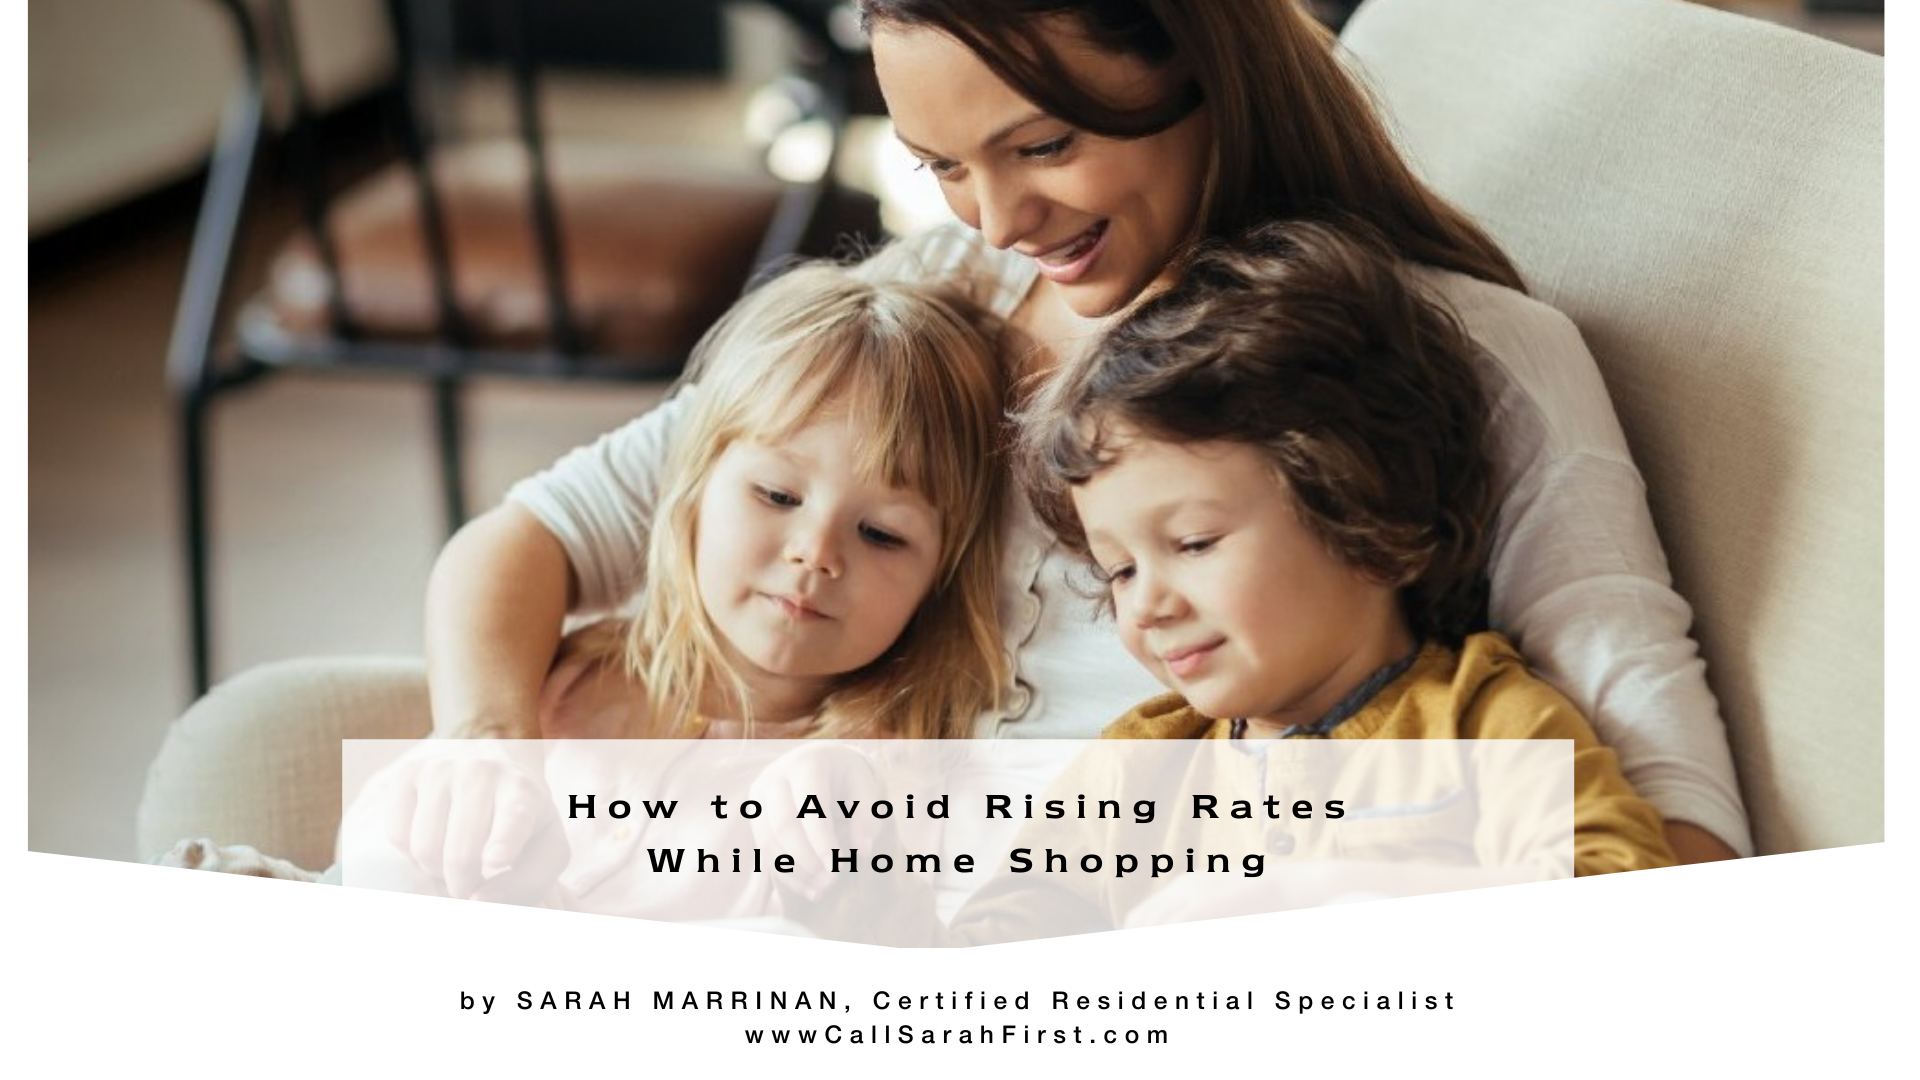 How to Avoid Rising Rates While Home Shopping